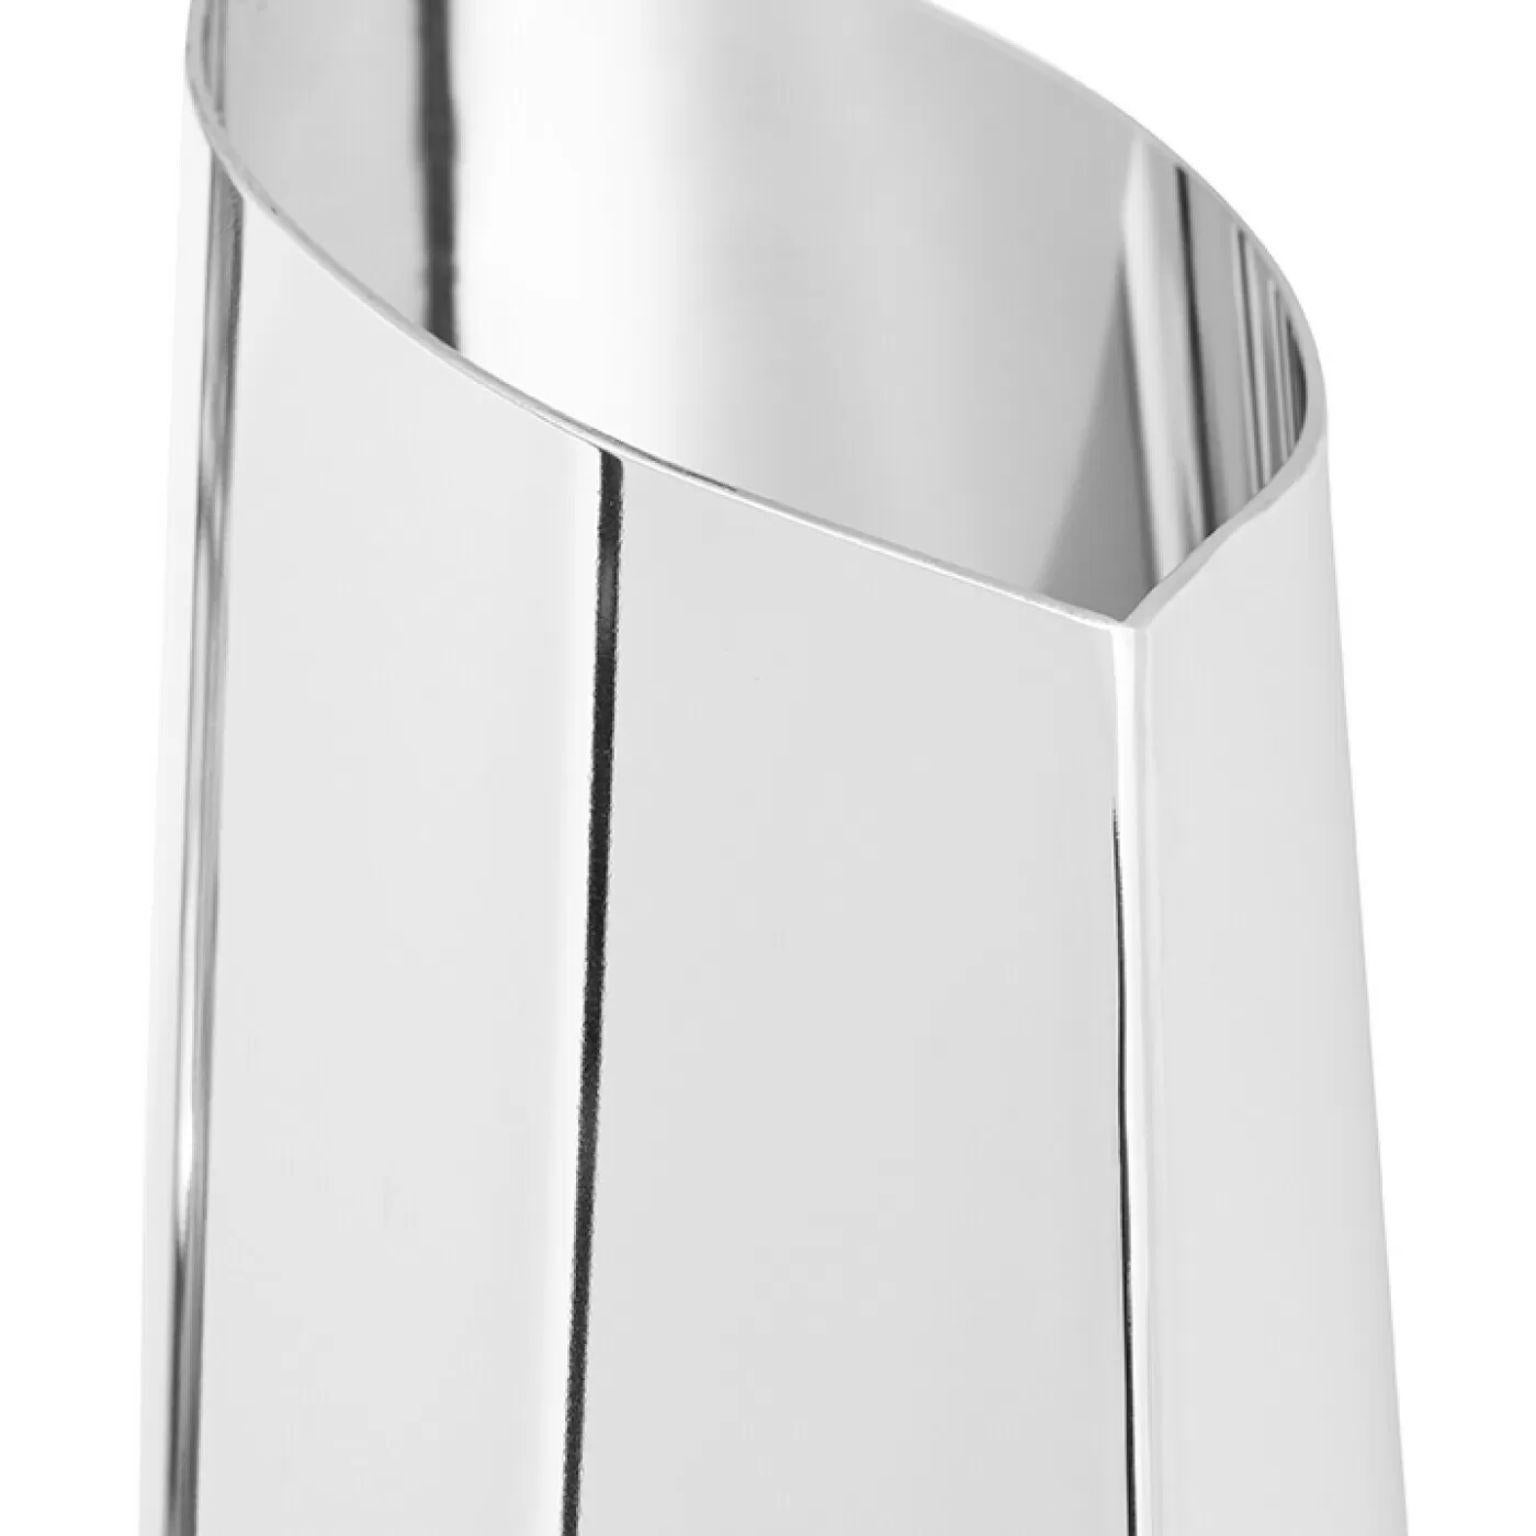 Stainless Steel Parova Flamed Gold L60 Vase by Zieta For Sale